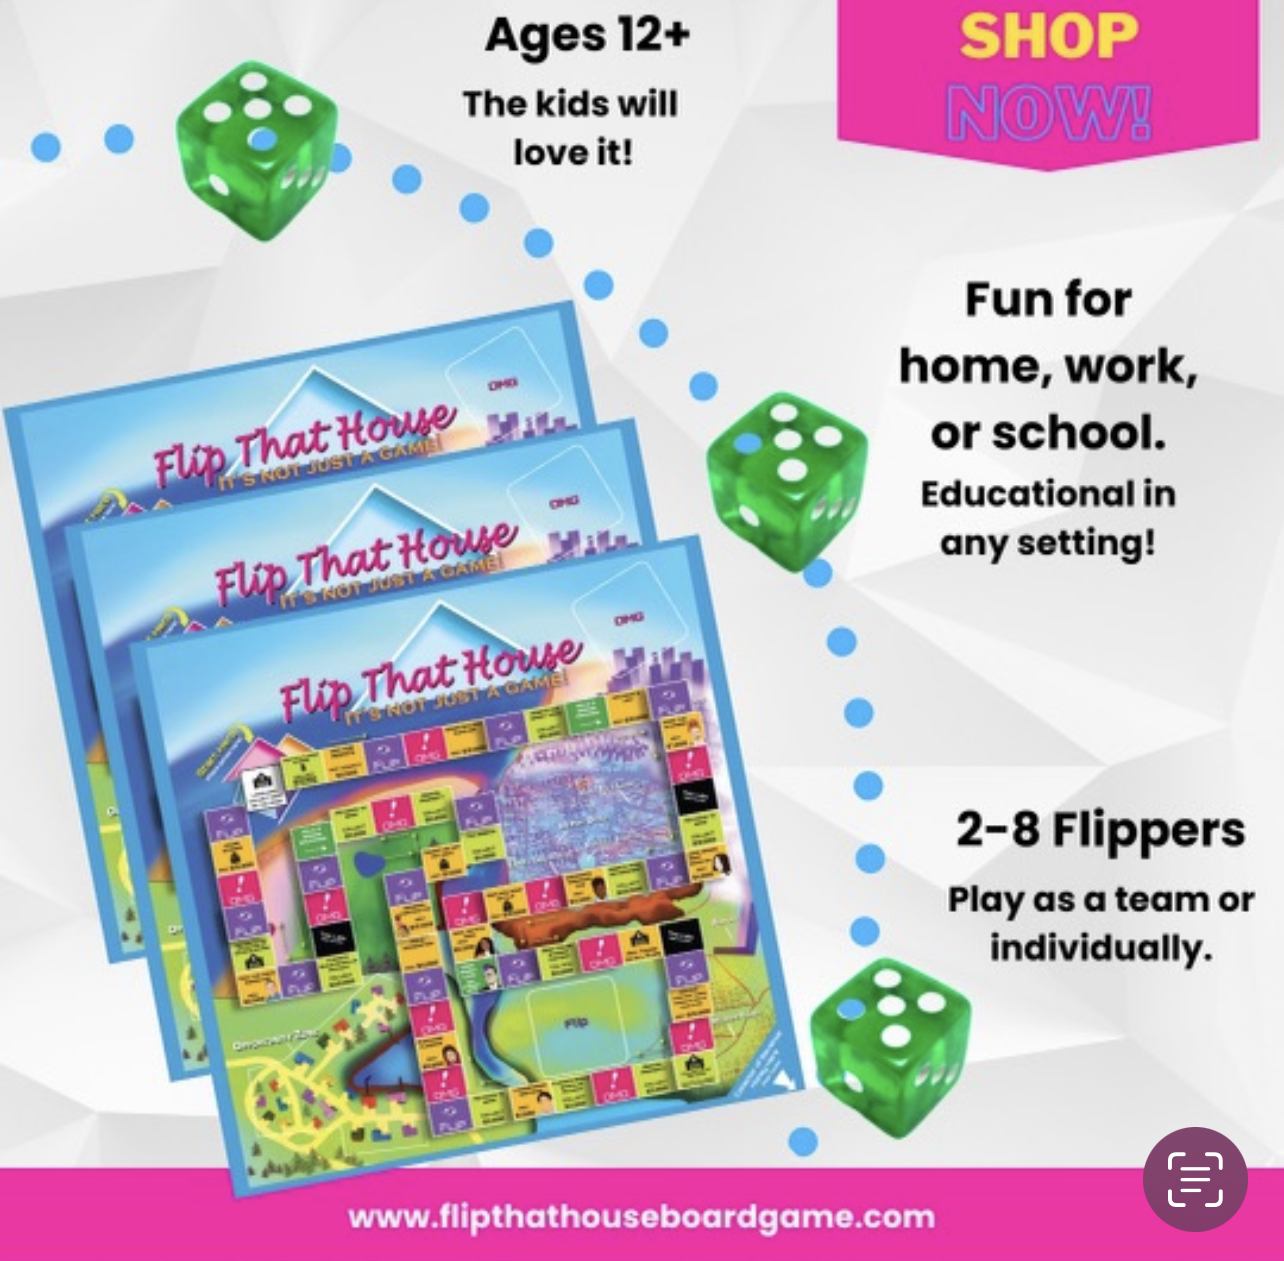 Flip That House The Board Game- The Board Game That Combines Education With Play